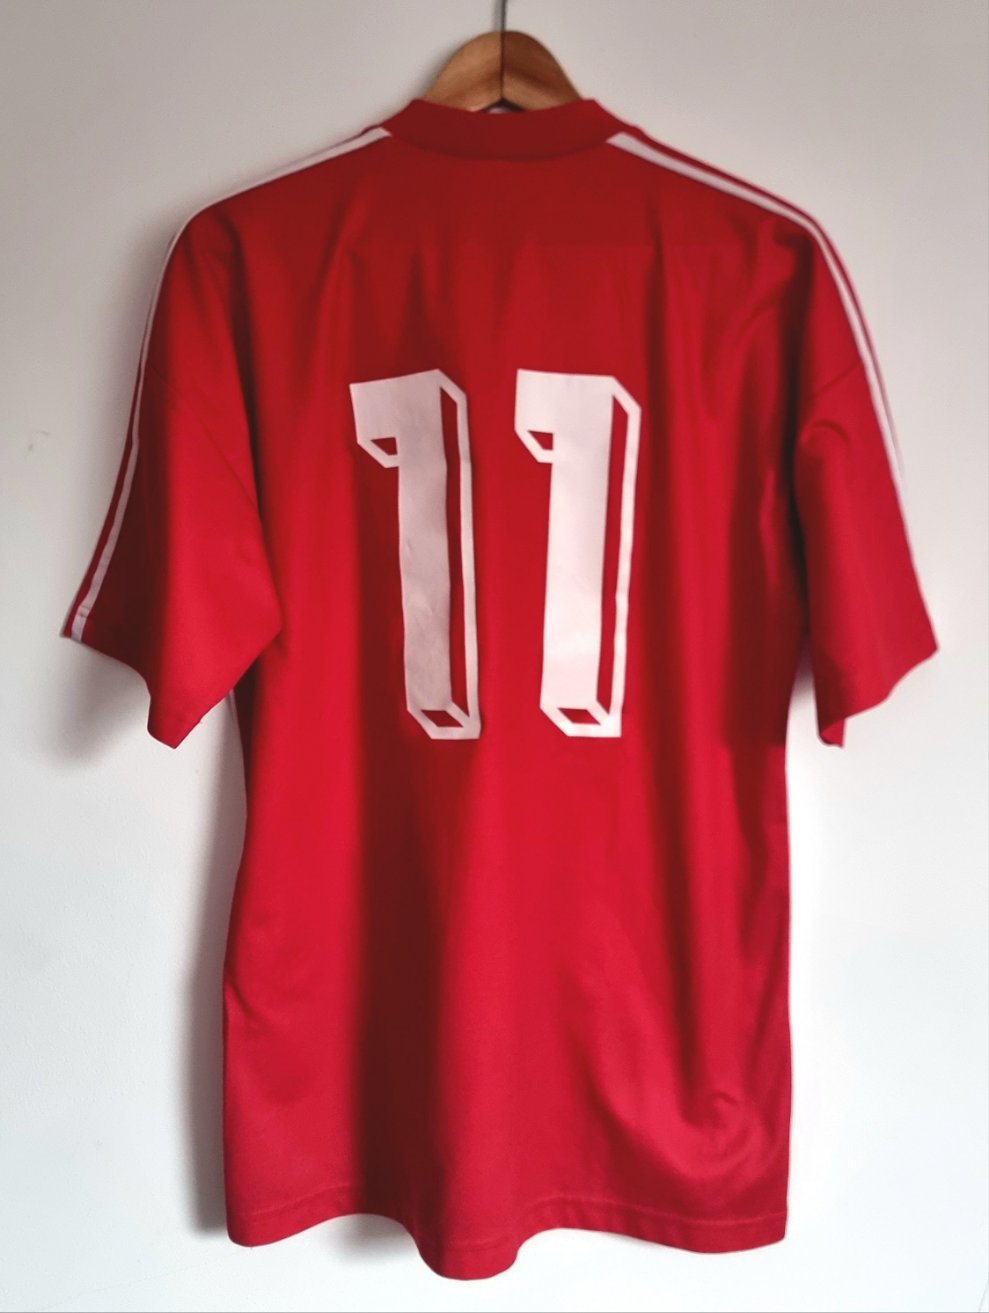 Adidas FC Ceresio 90s Home Shirt Large